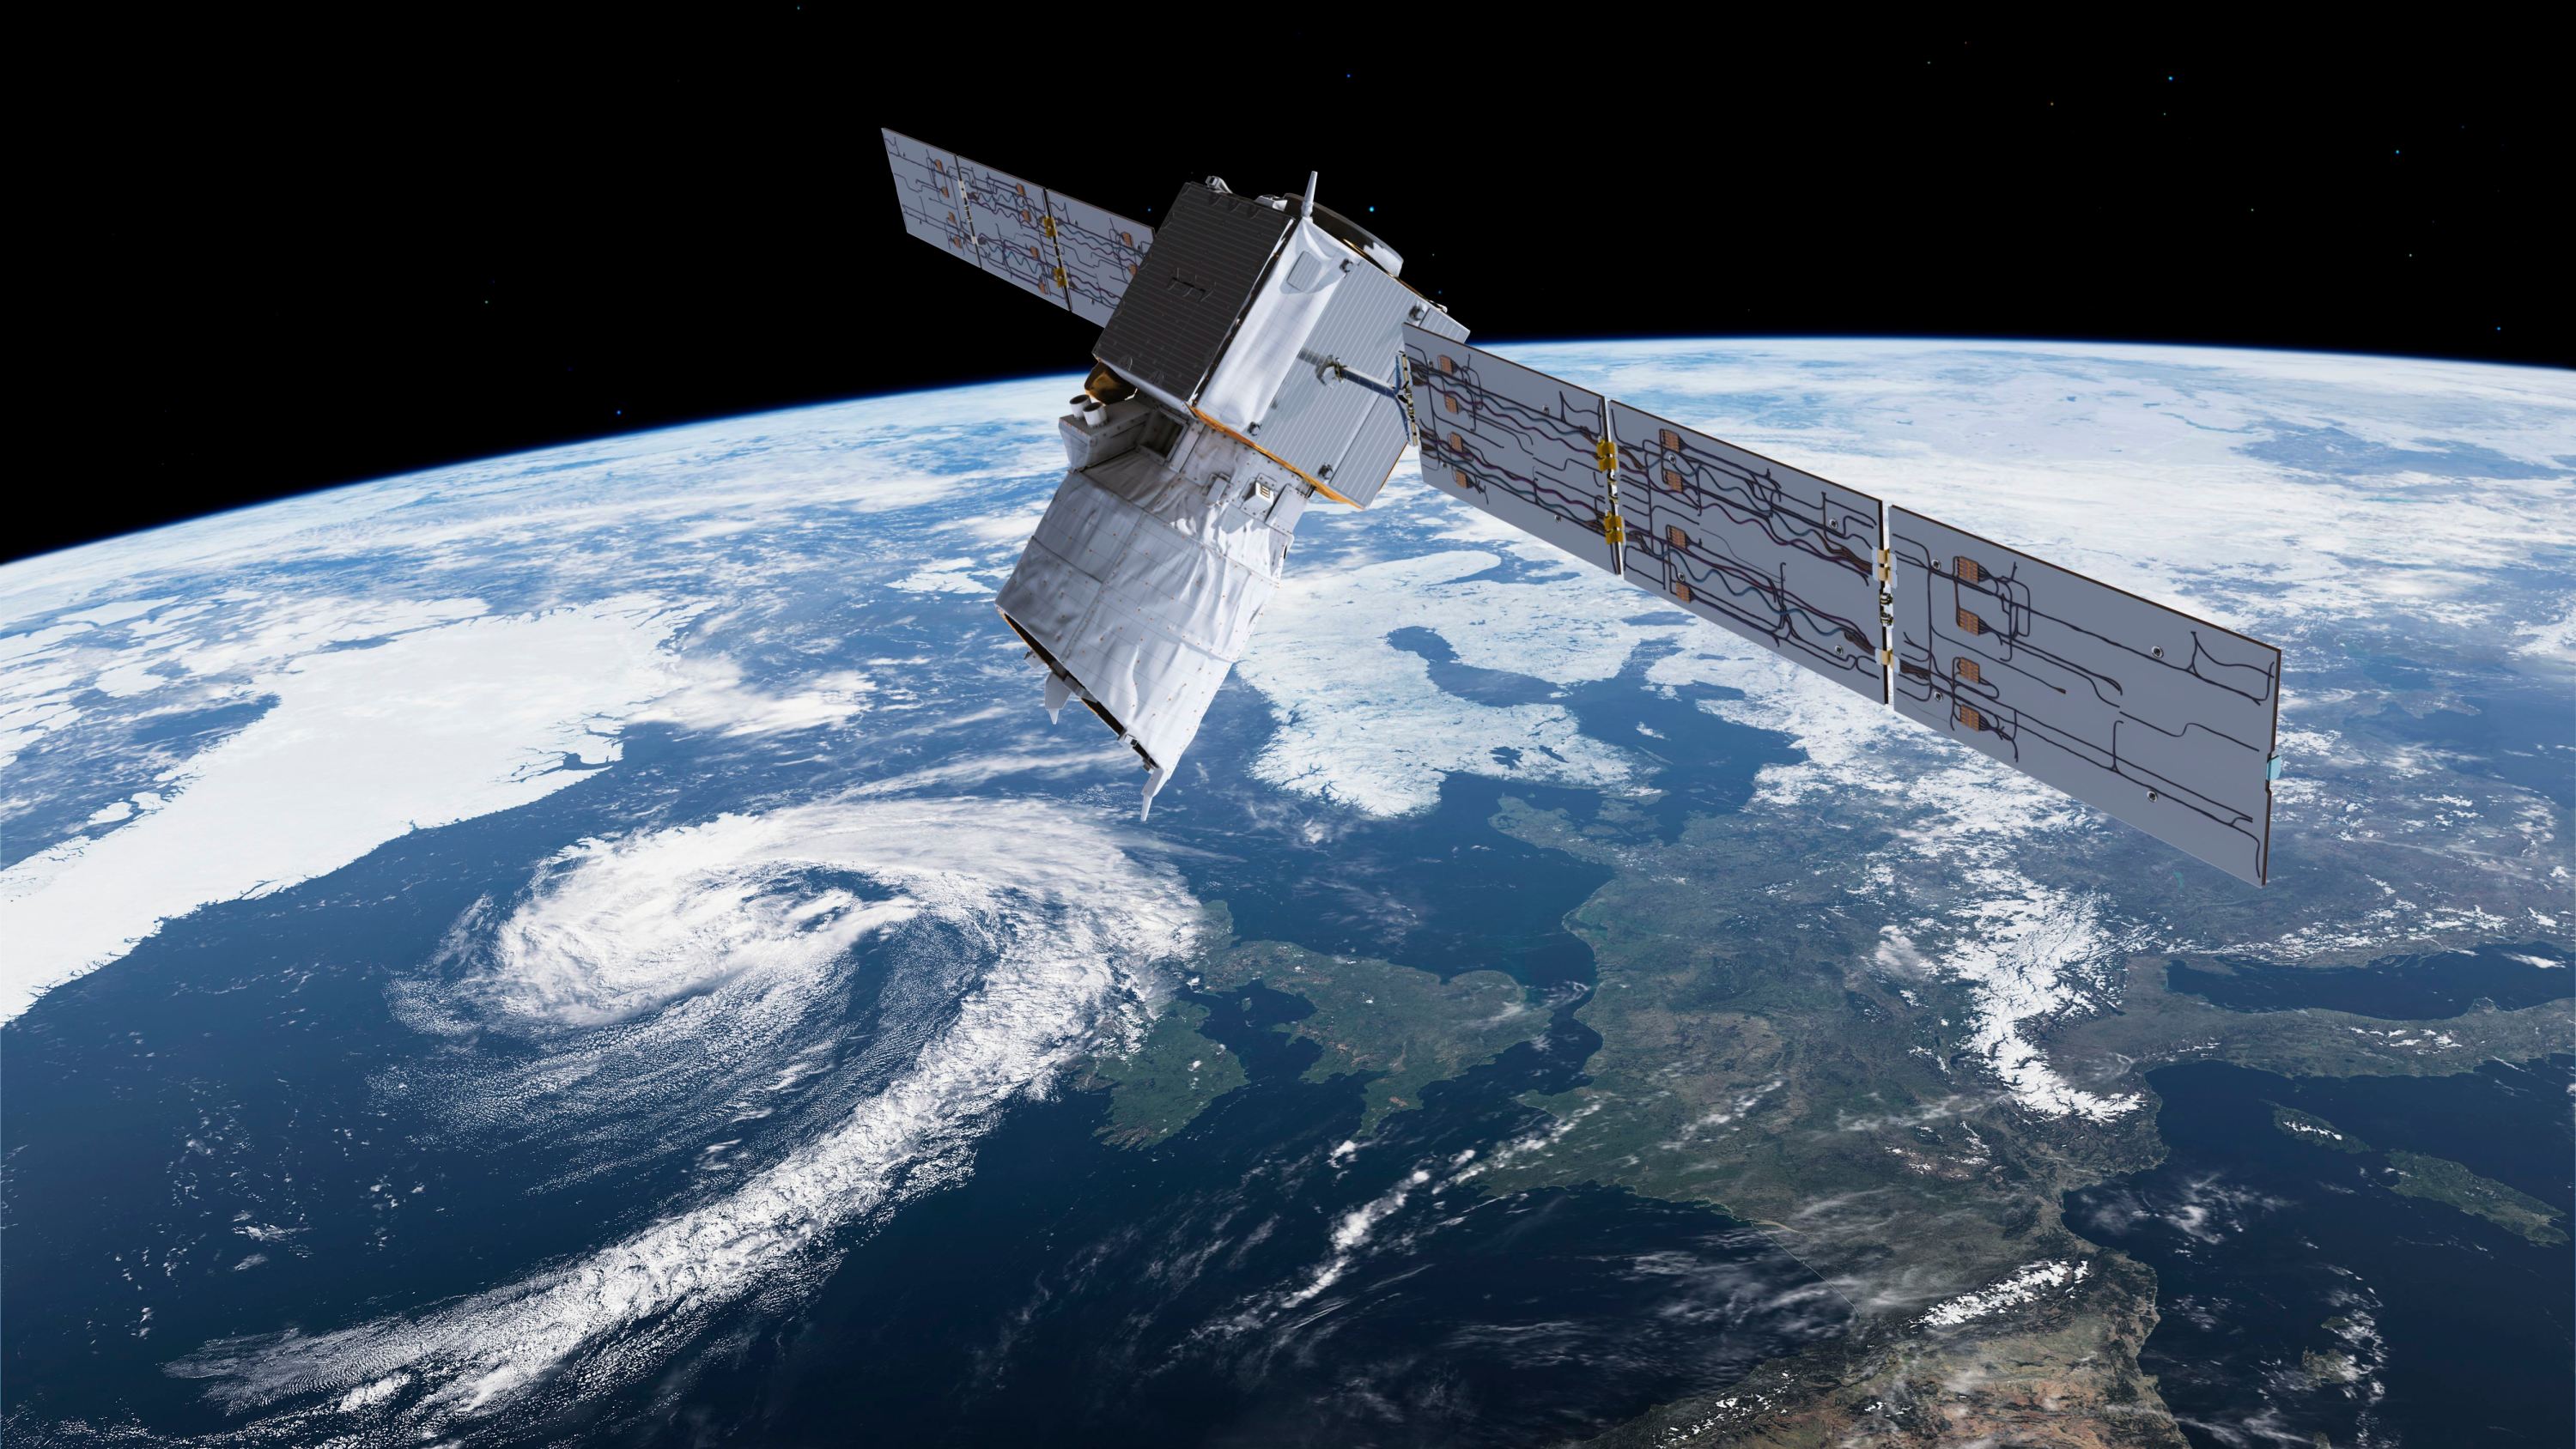 to solve space traffic woes, look to the high seas | mit technology review